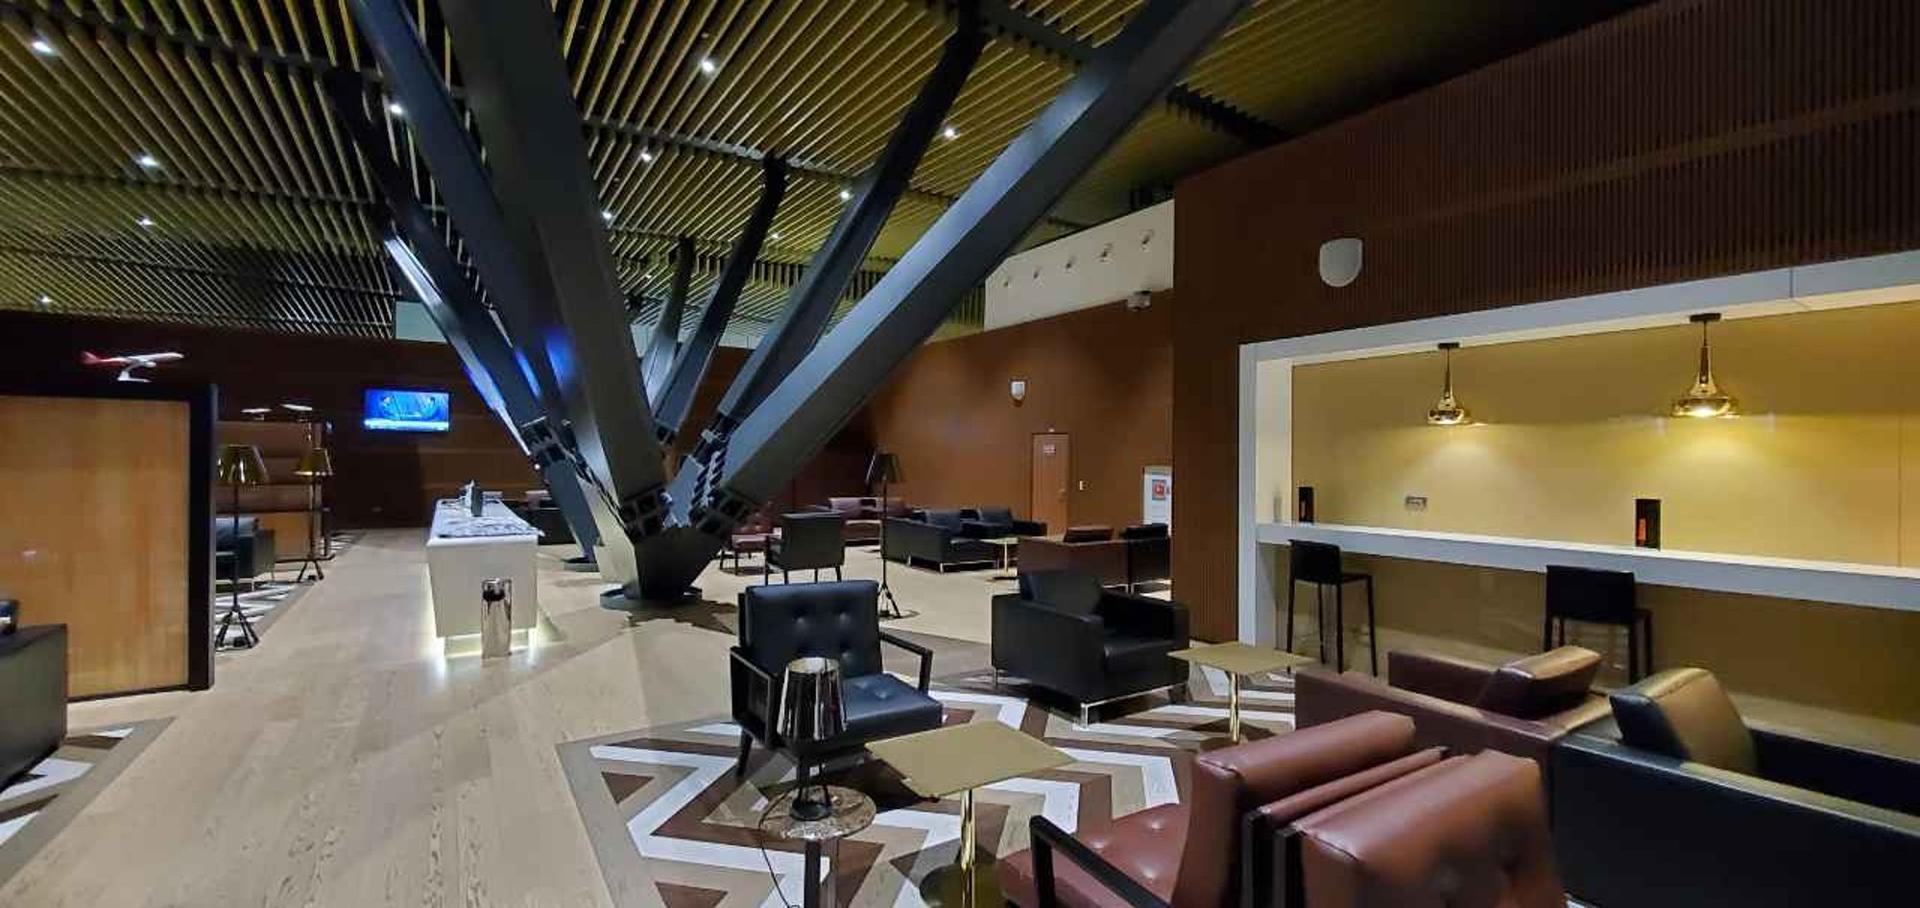 Business Class Lounge image 3 of 3